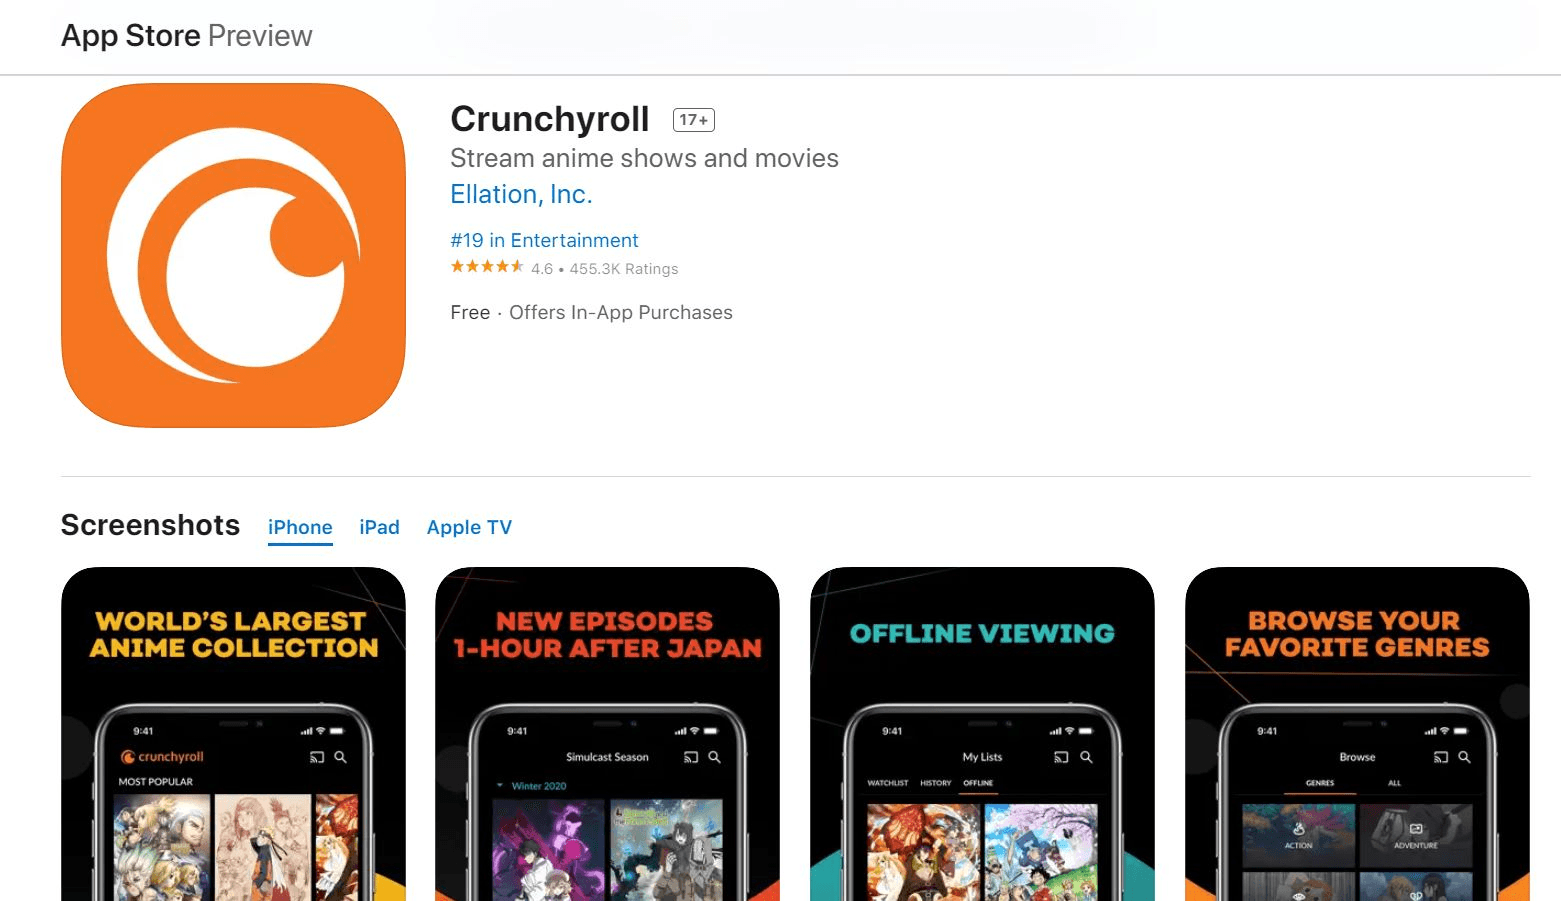 Download Crunchyroll content to view offline whenever and wherever you like!